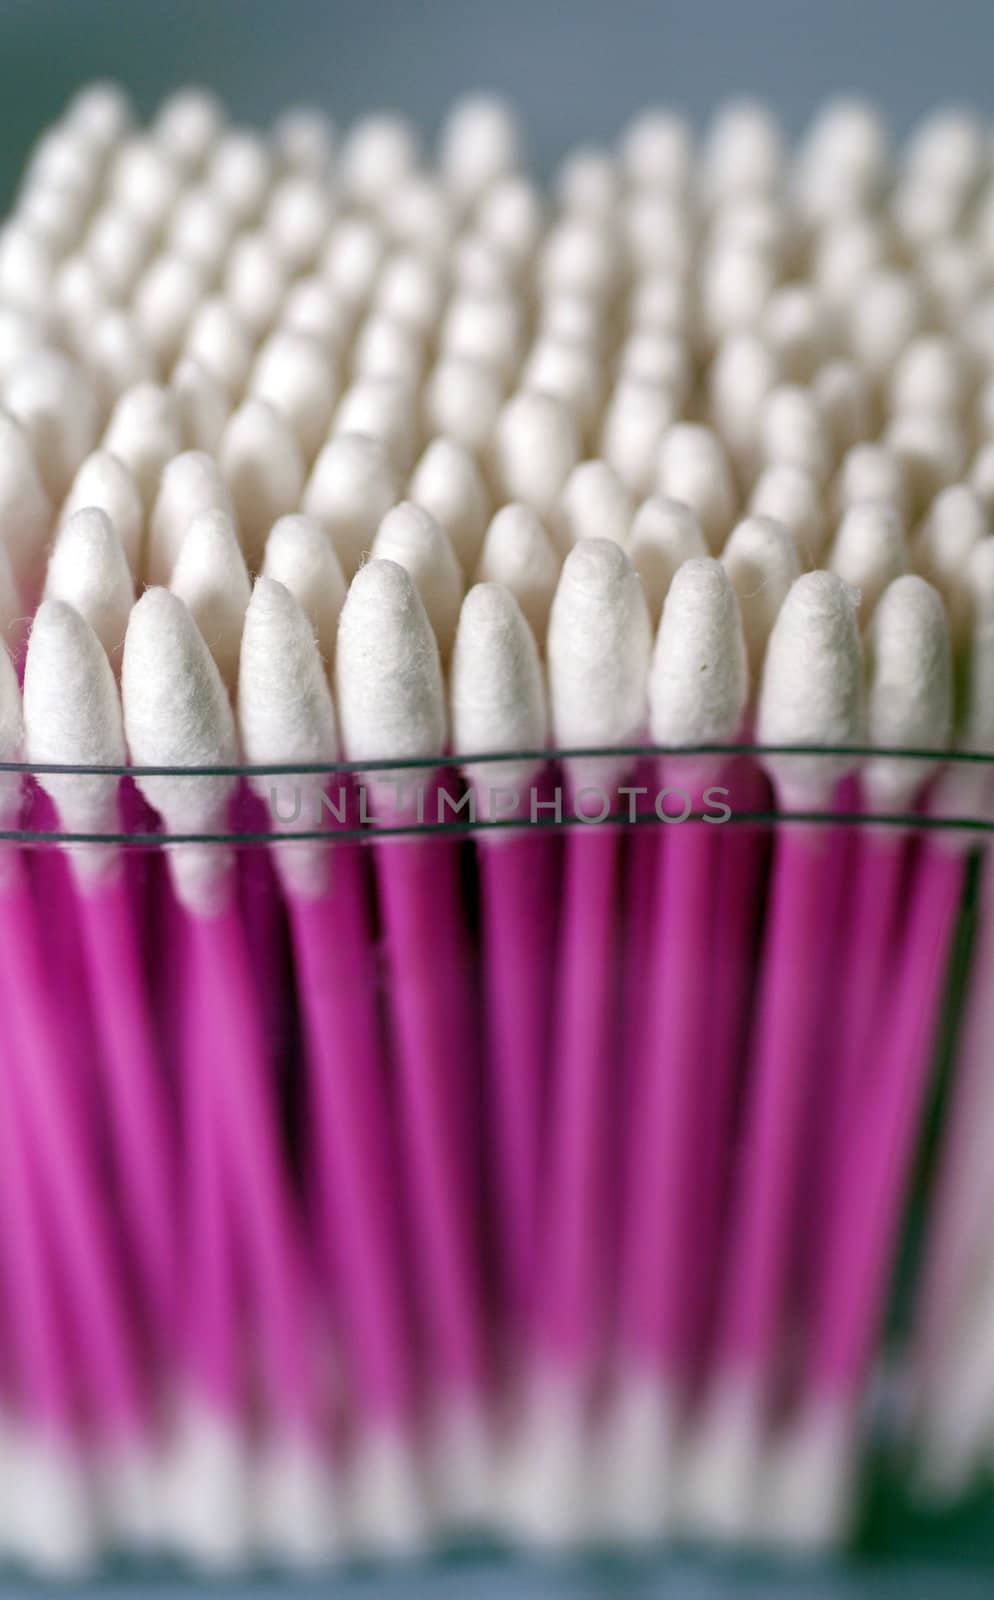 A photograph of cotton buds with artistic blur